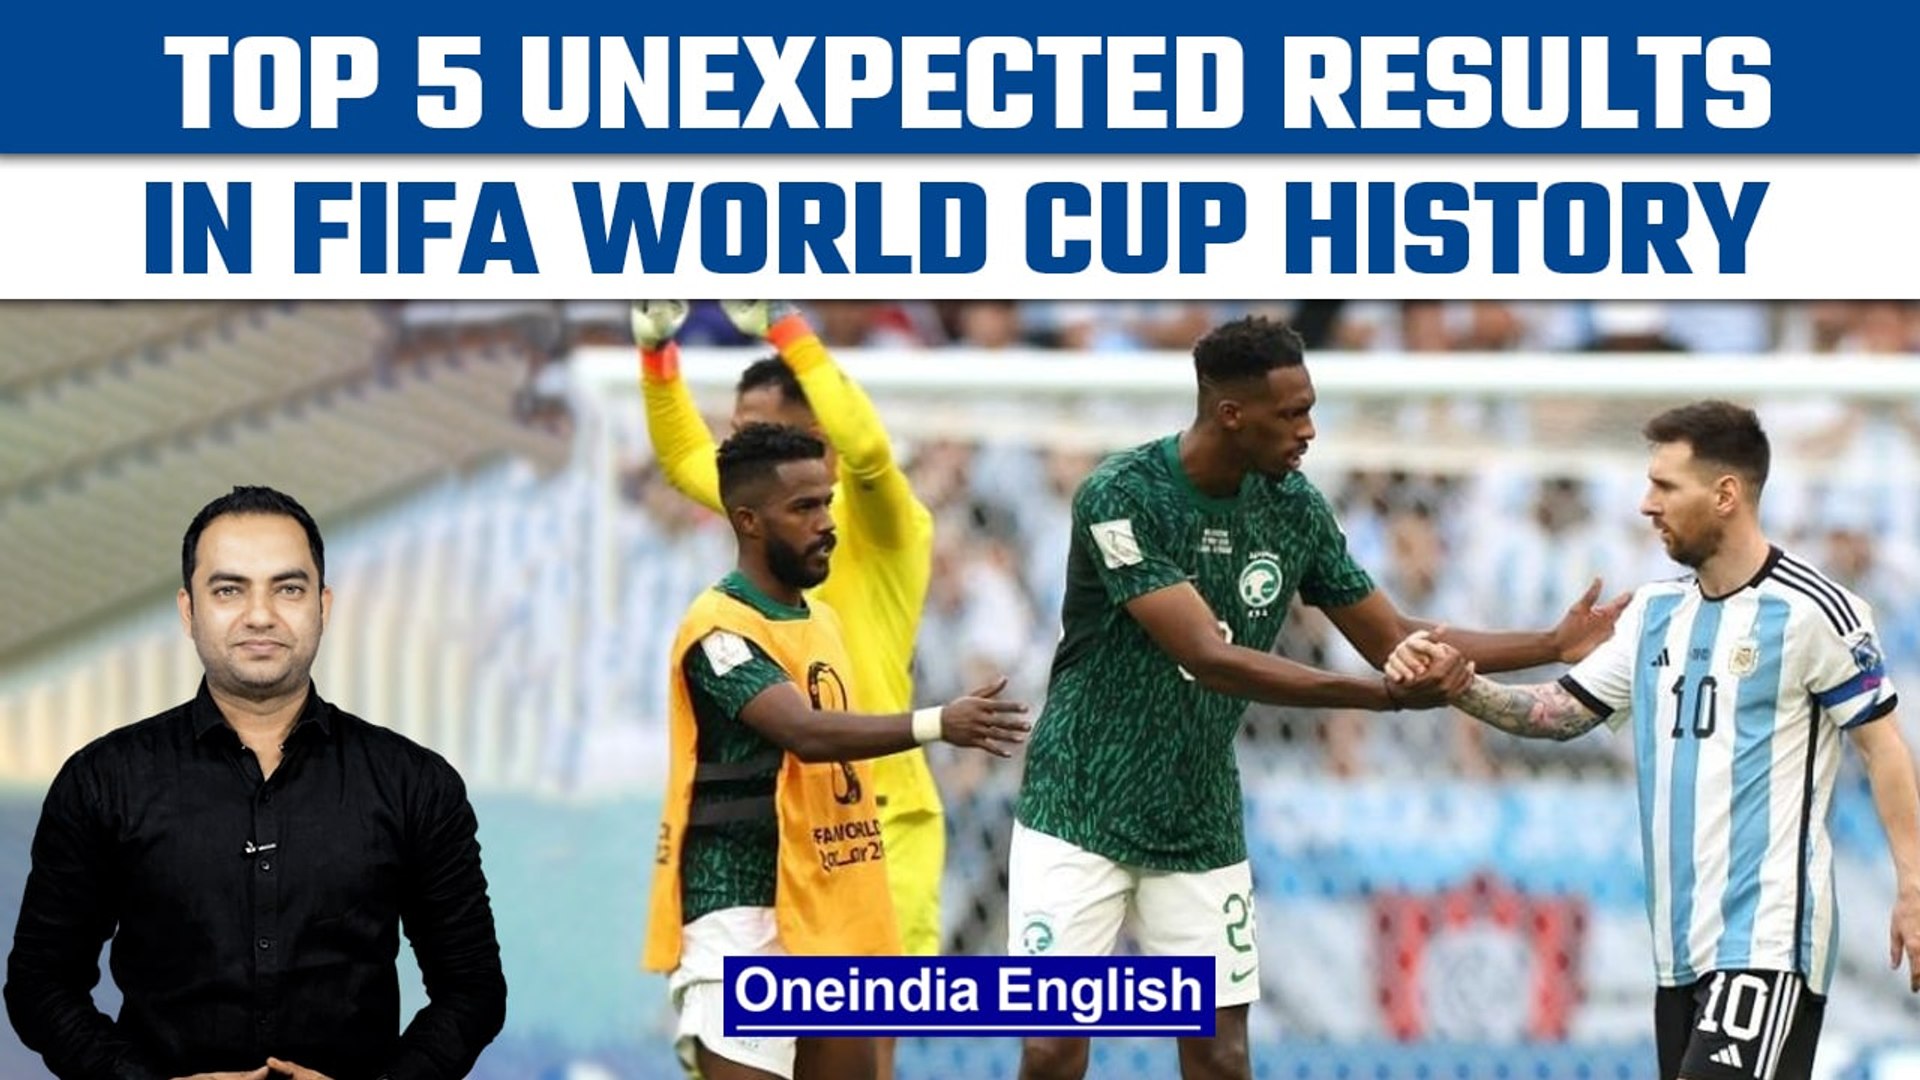 FIFA World Cup 2022 First week throws surprise victories for underdogs Oneindia News*Special